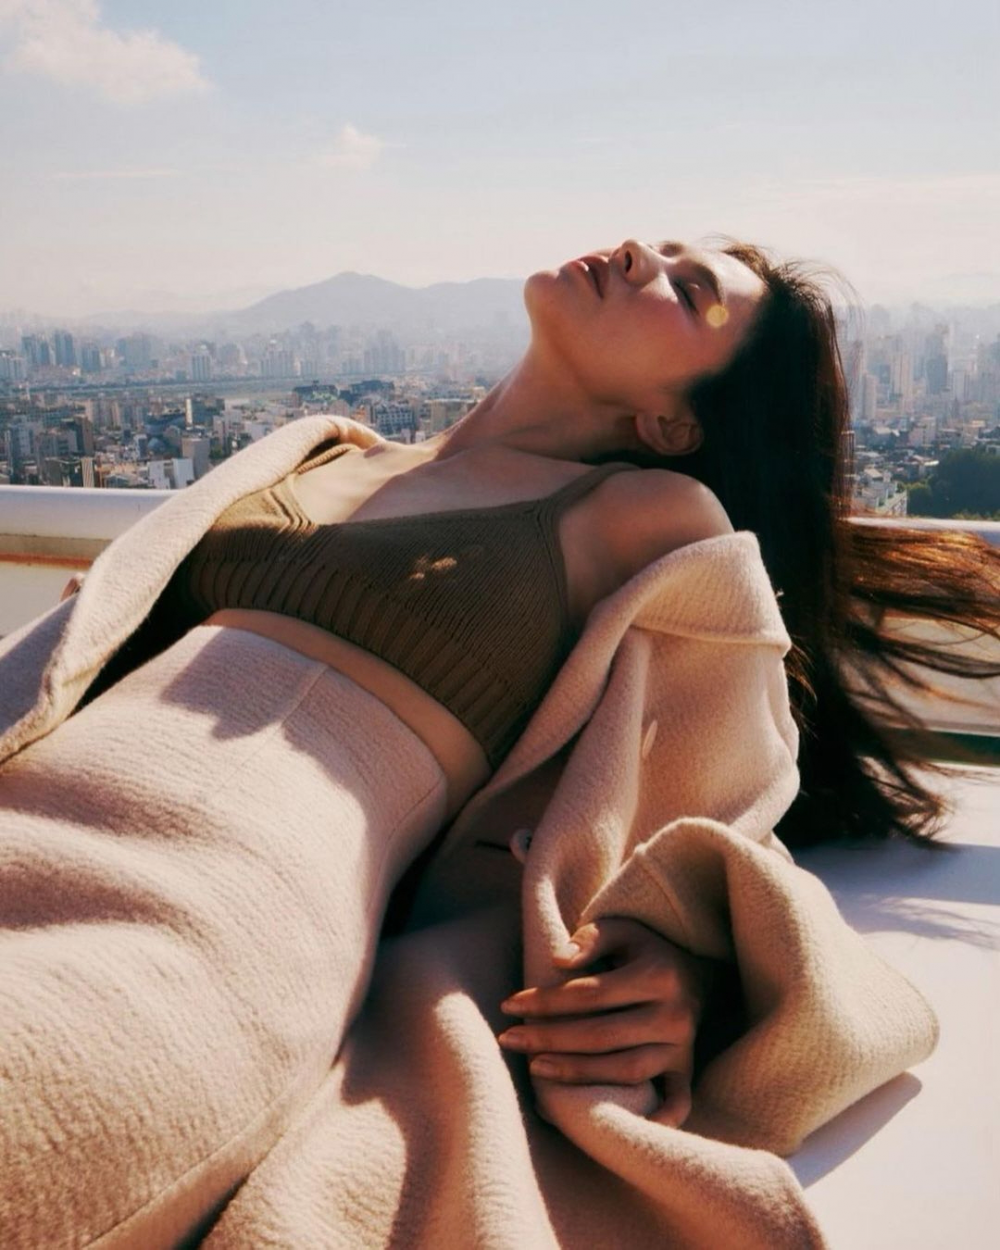 Song Hye Kyo B cuts of her 'Vogue Korea' pictorial